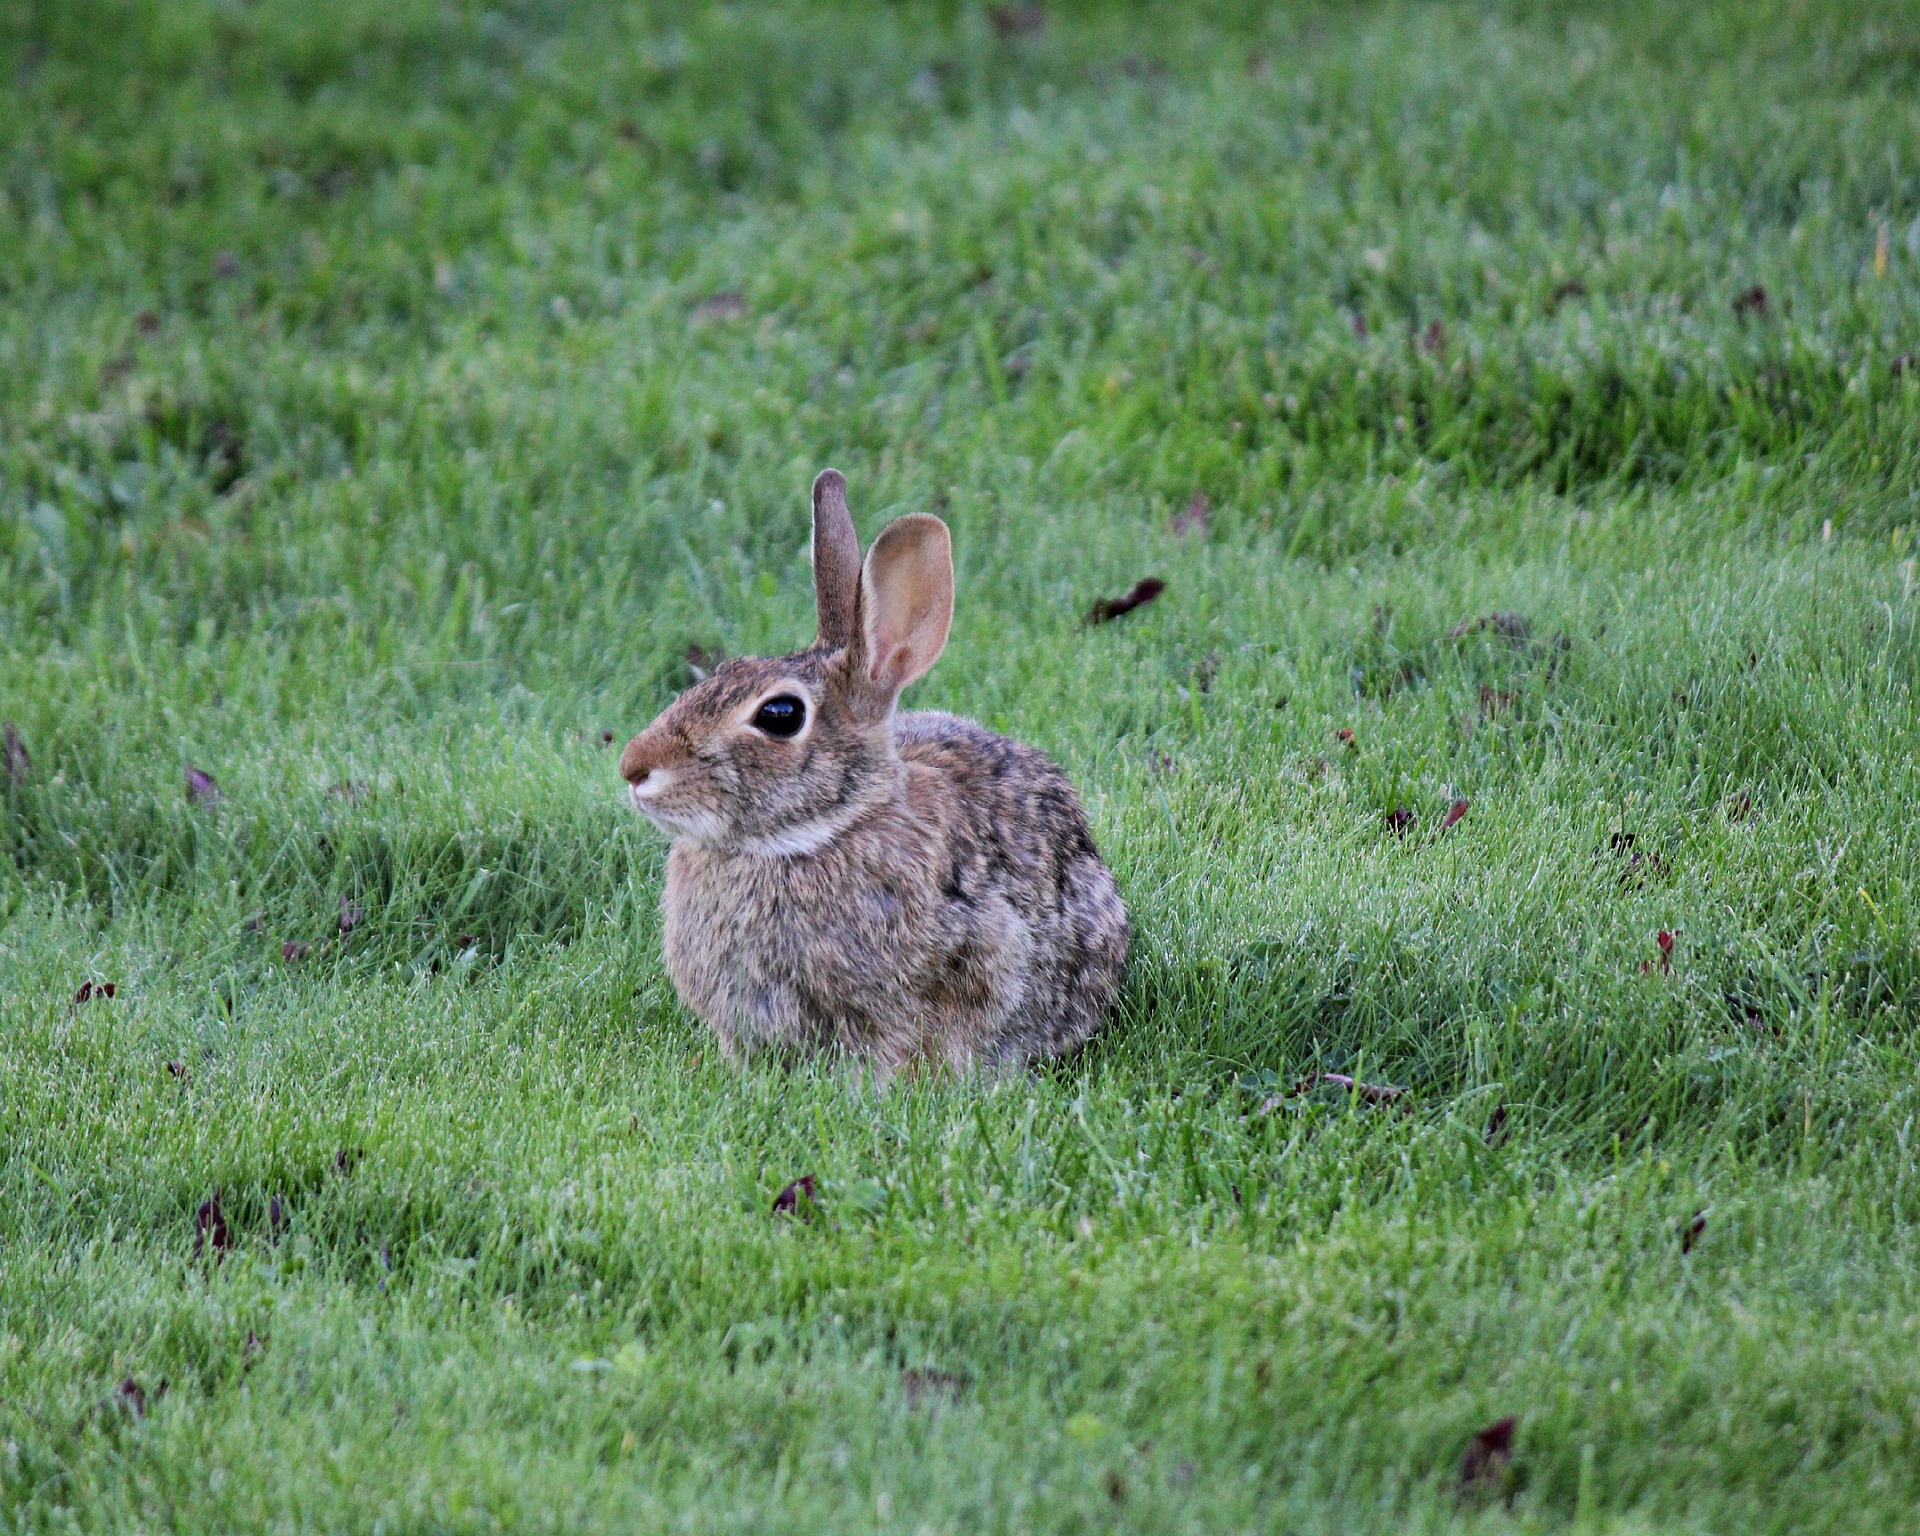 Rabbits: How to Identify and Get Rid of Rabbits | Garden Pest ...